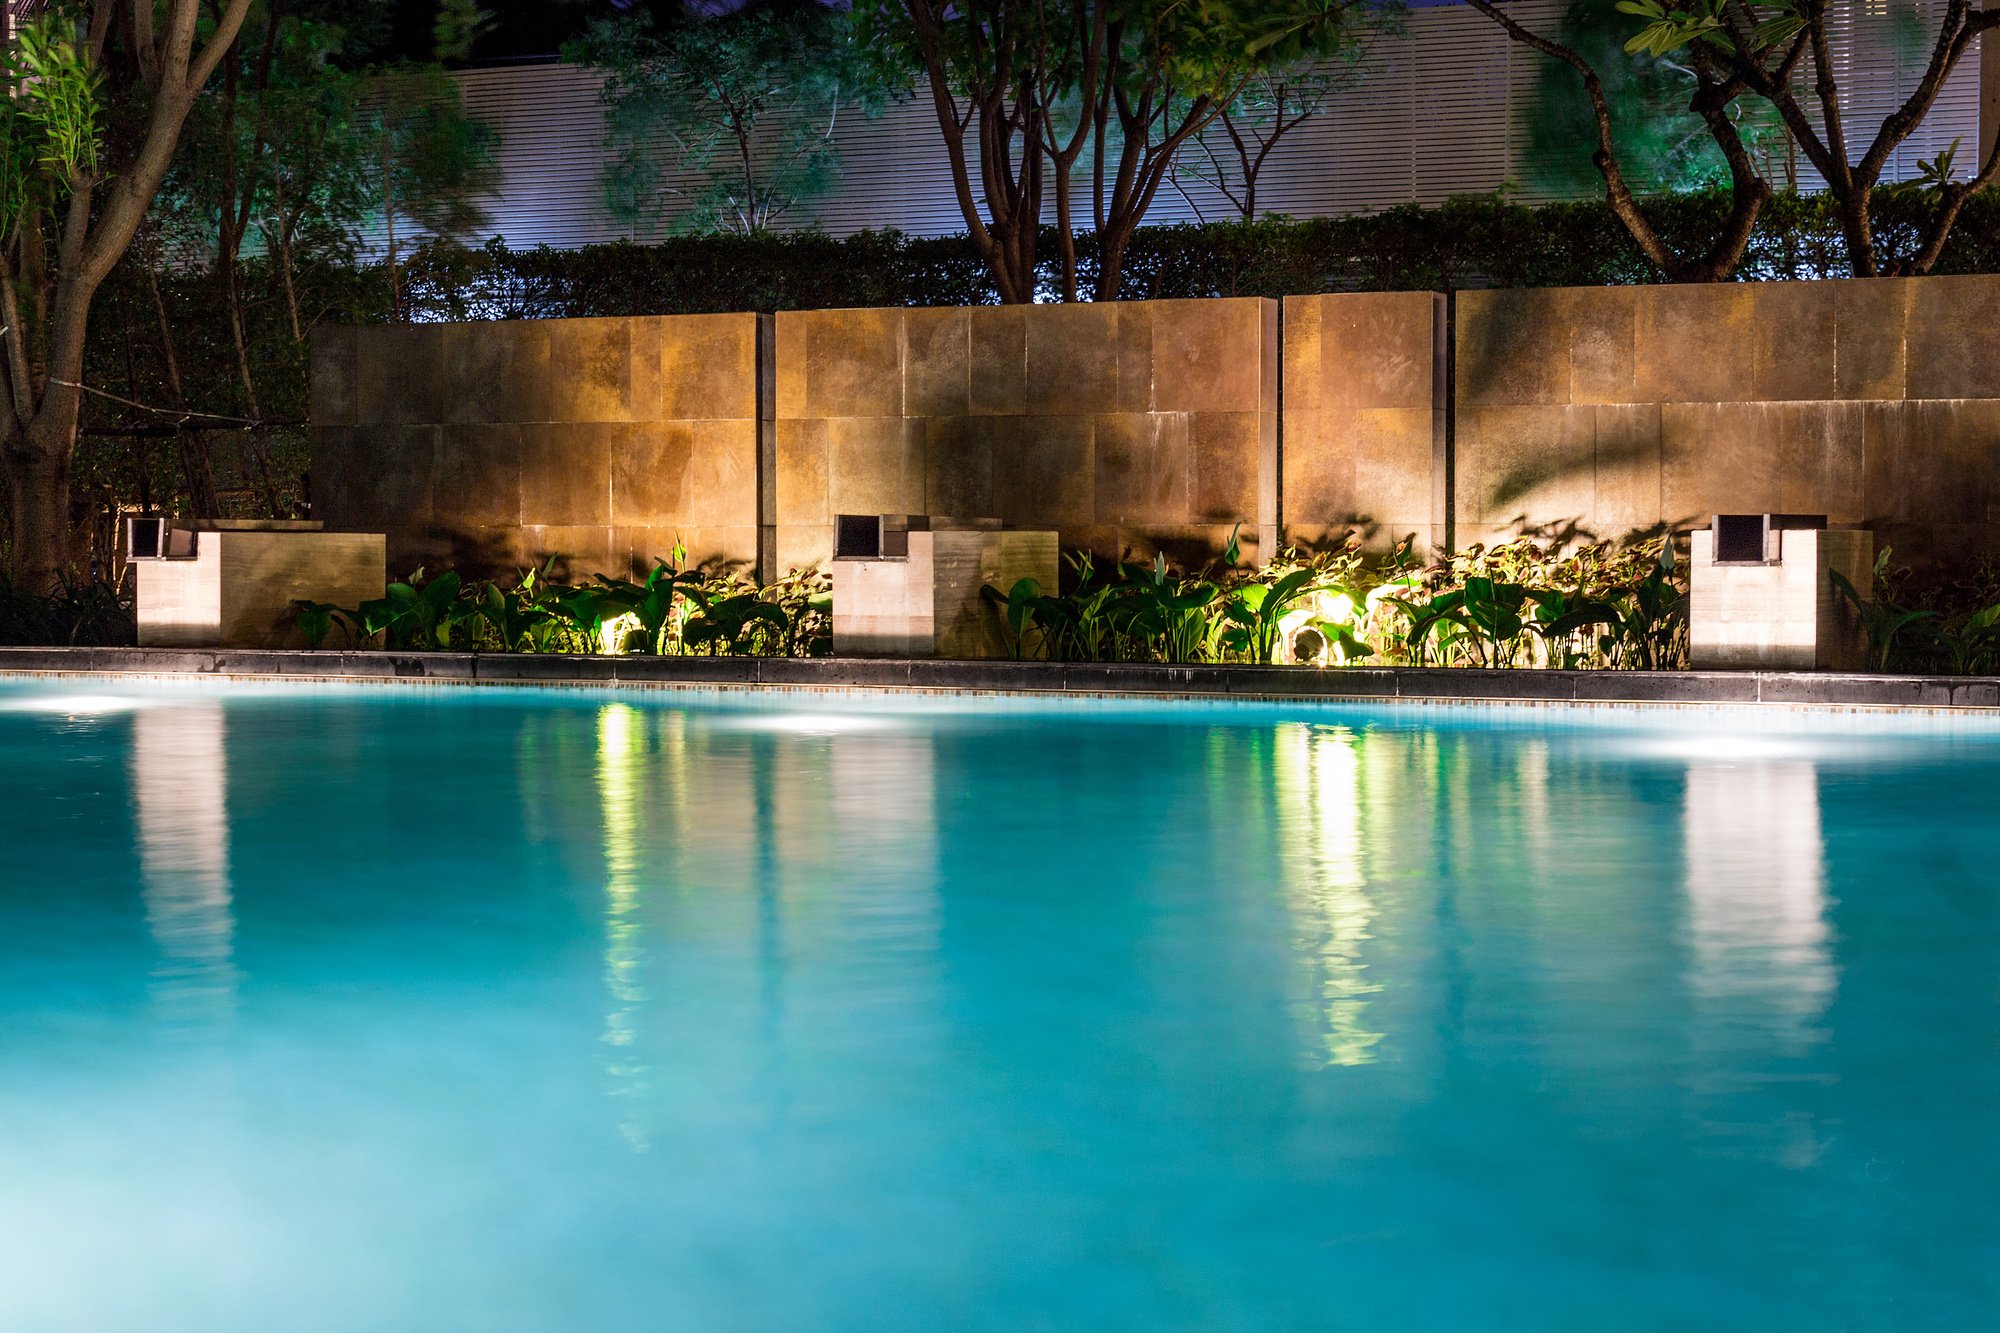 Pool area lighting can keep the party going even when the sun goes down. Learn the top three benefits of this lighting here.